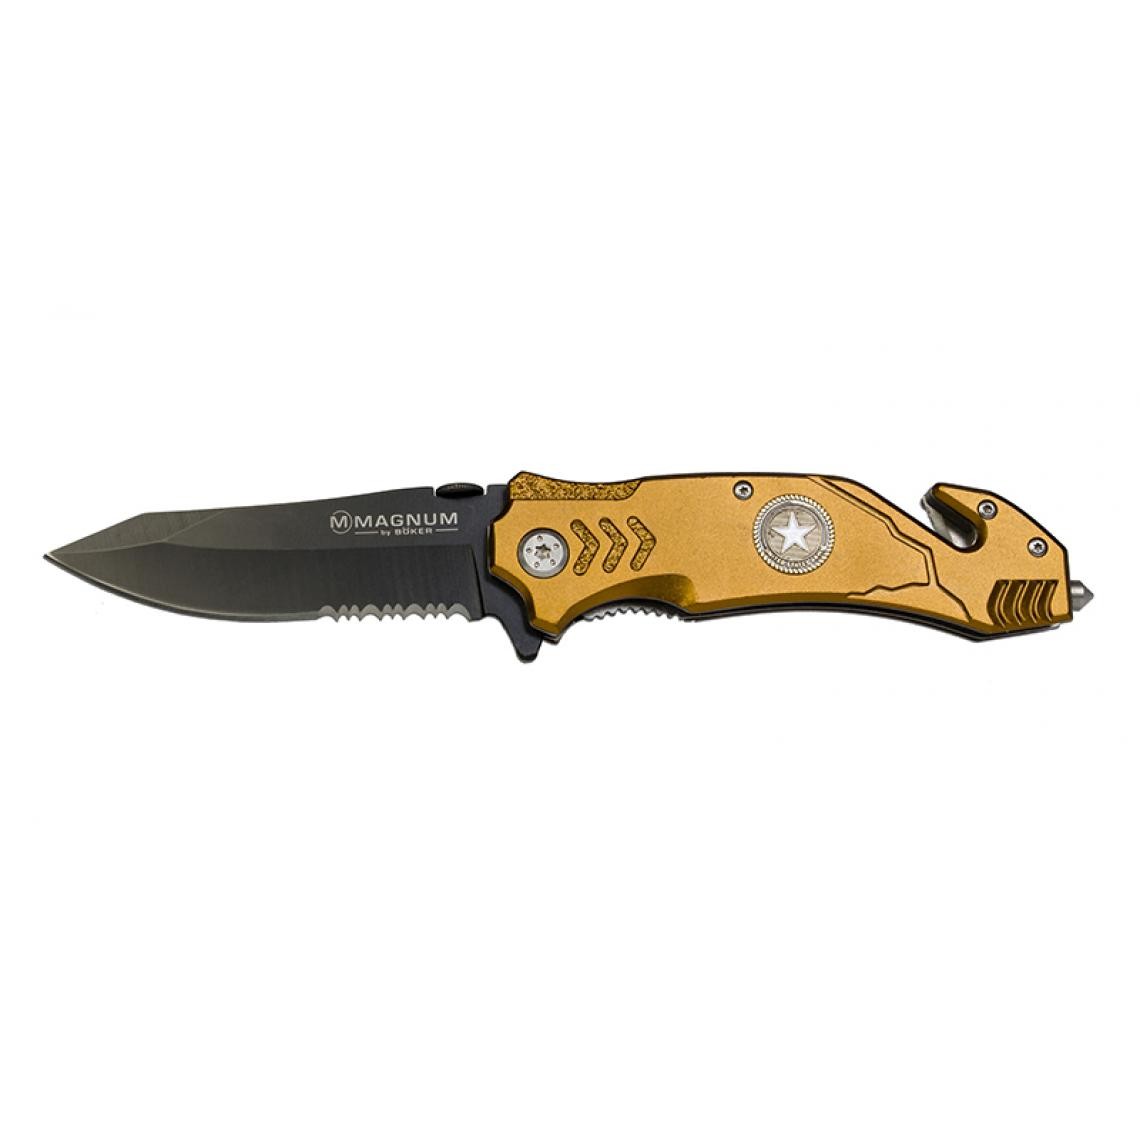 Boker - BOKER MAGNUM - 01LL471 - ARMY RESCUE - Outils de coupe